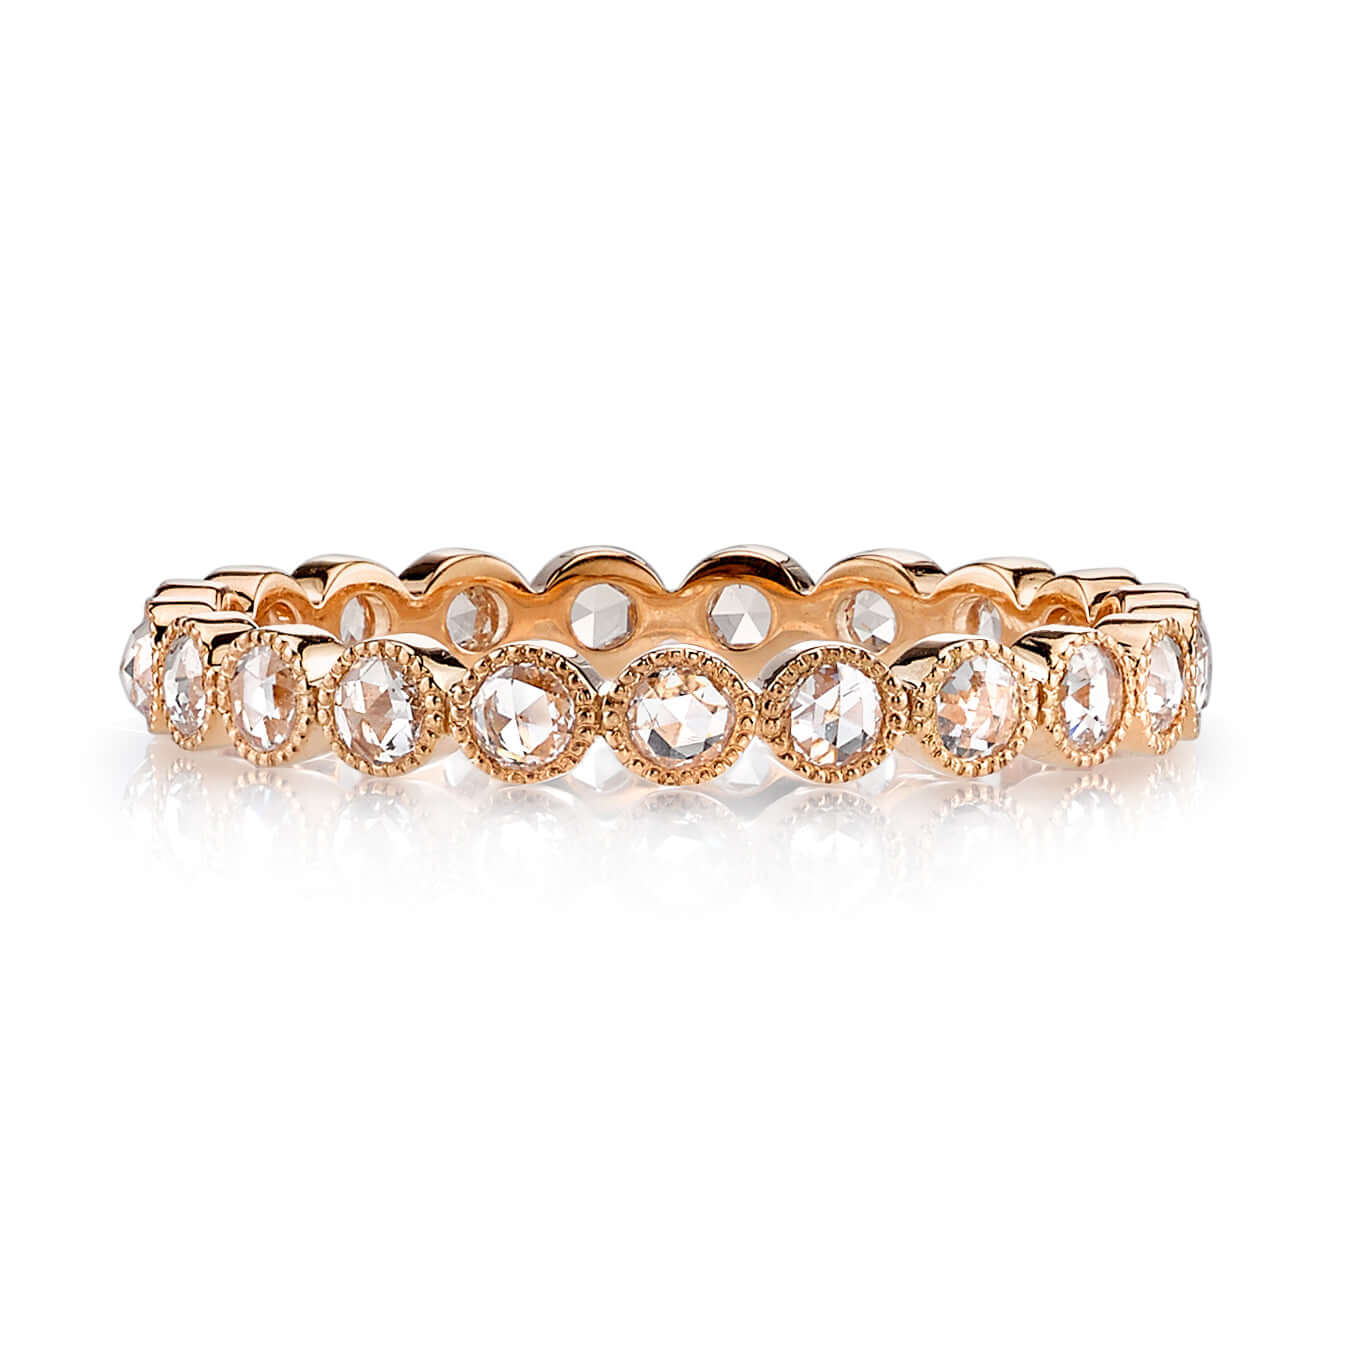 SINGLE STONE SMALL ROSE CUT GABBY BAND | Approximately 0.45ctw G-H/VS-SI Rose cut diamonds bezel set in a handcrafted eternity band. Approximate band with 2.9mm. Please inquire for additional customization.